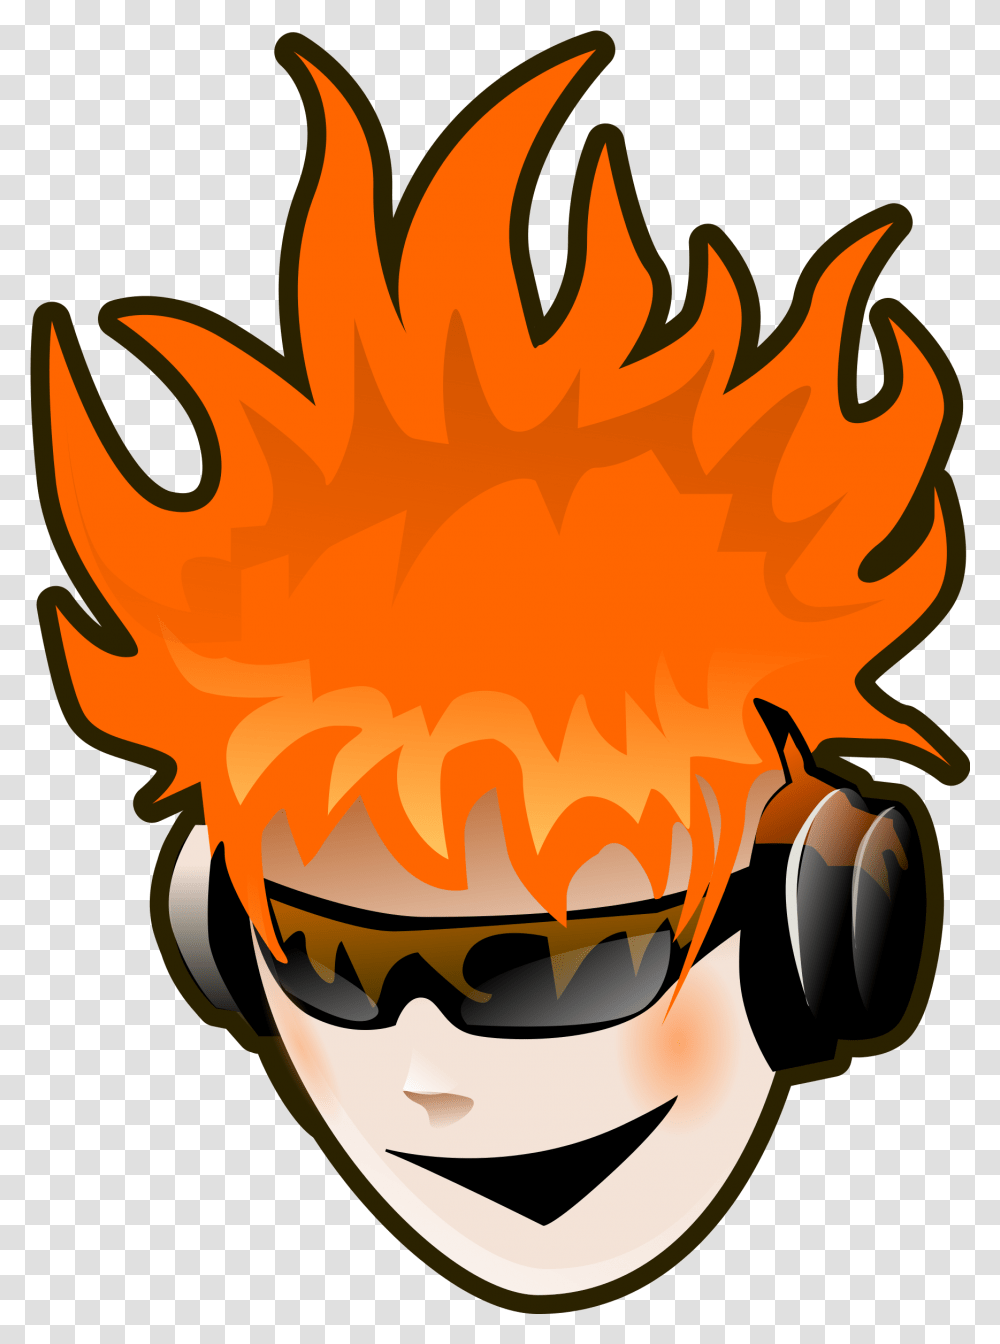 Headphone Clipart Animated Headphone With Man Cartoon, Fire, Flame, Sunglasses, Accessories Transparent Png